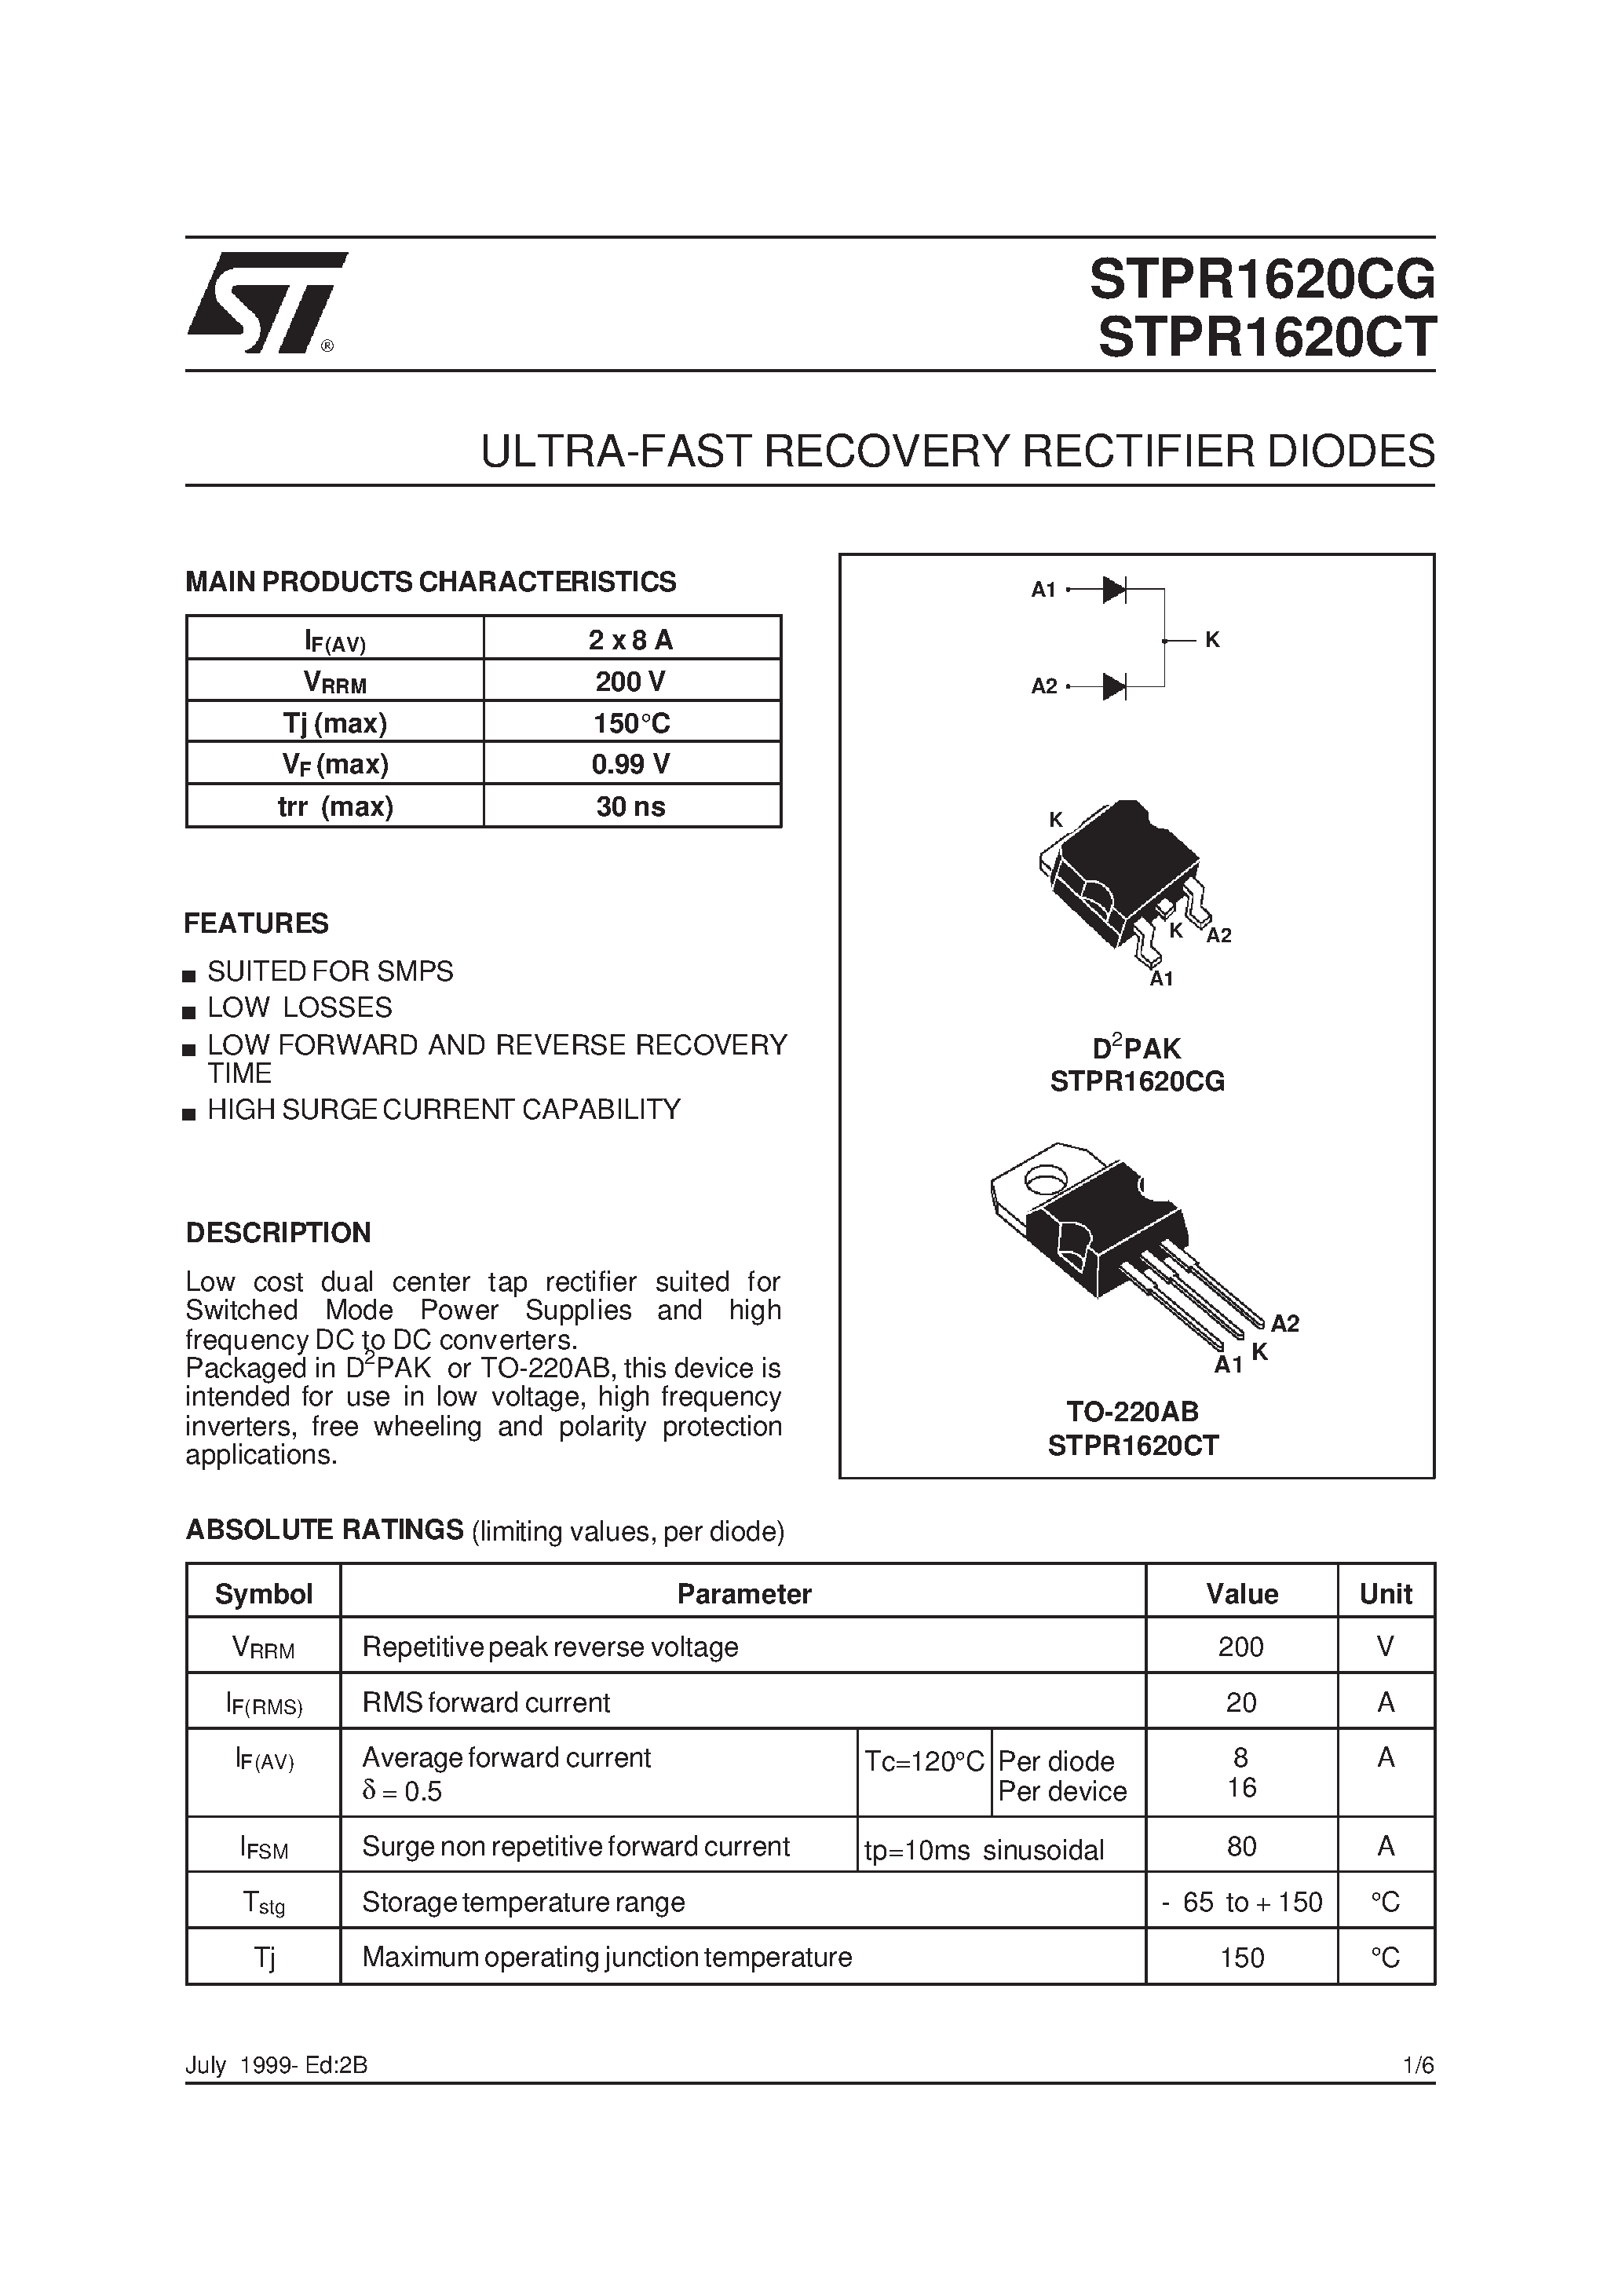 Даташит STPR1620 - ULTRA-FAST RECOVERY RECTIFIER DIODES страница 1